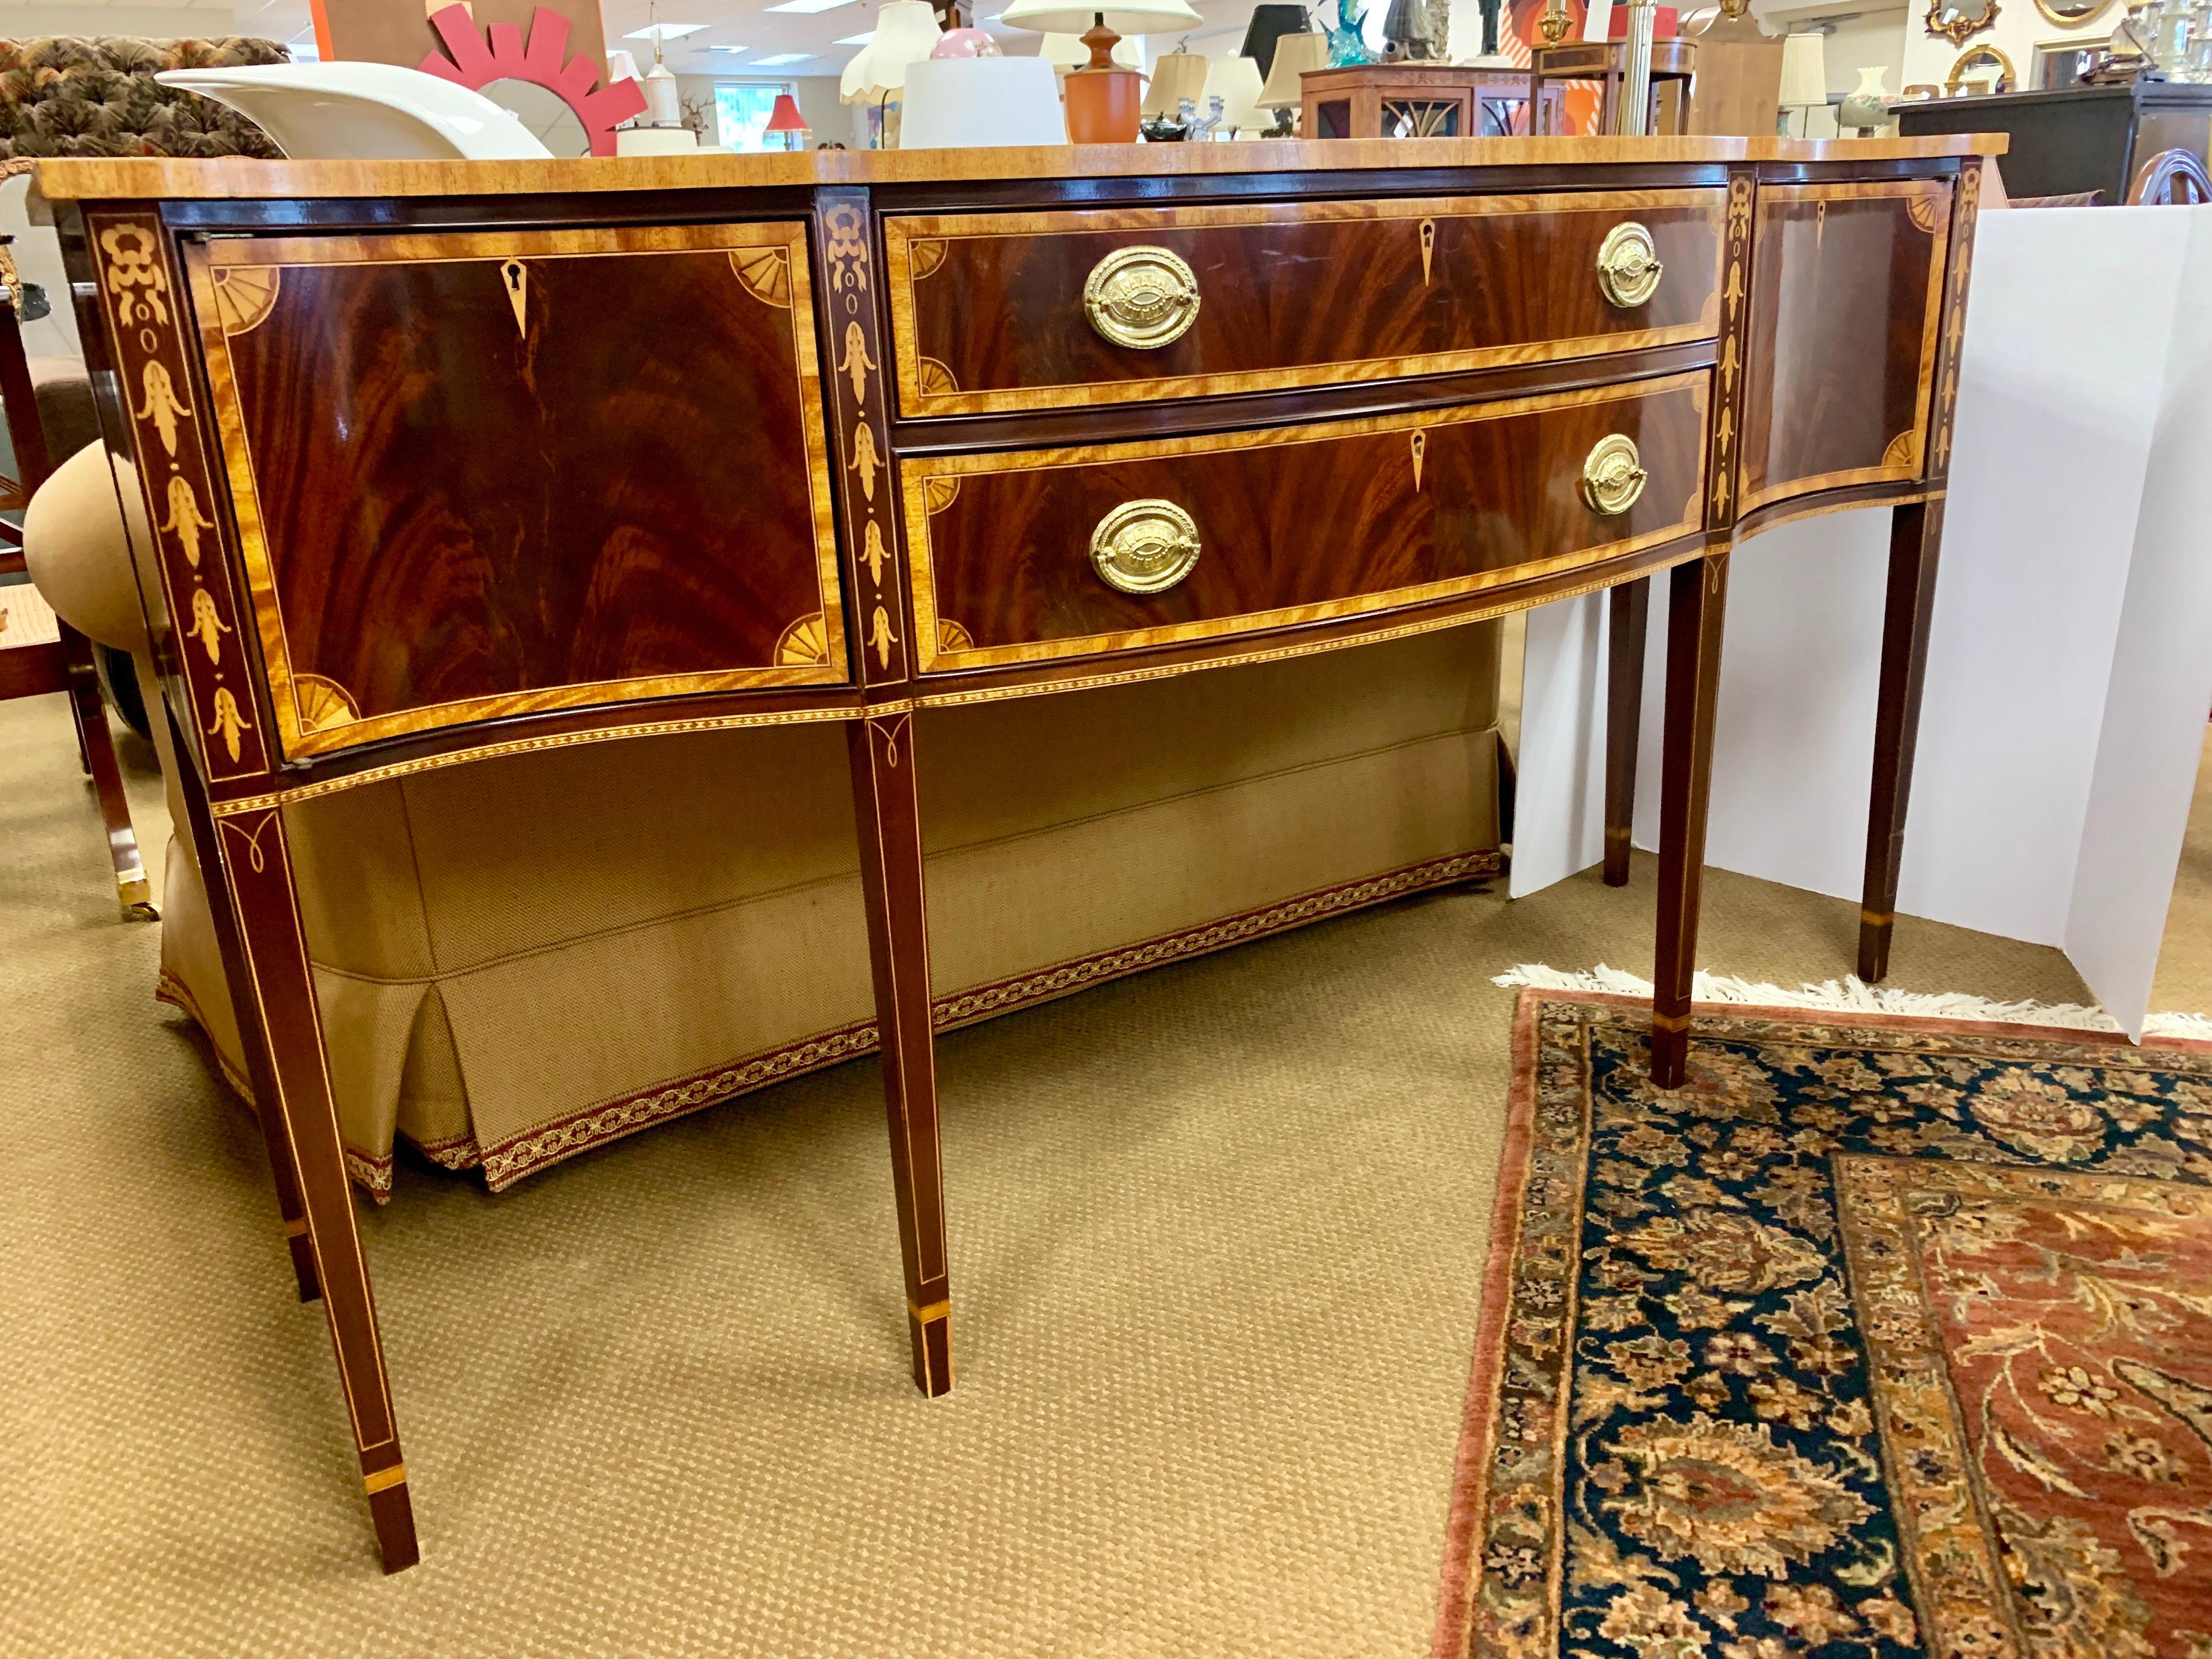 Elegant mahogany Councill Craftsman sideboard has multiple drawers and compartments and features gorgeous line and bell flower inlay. Has lockable drawers/compartments with two keys as well as felt-lined drawer for silverware.